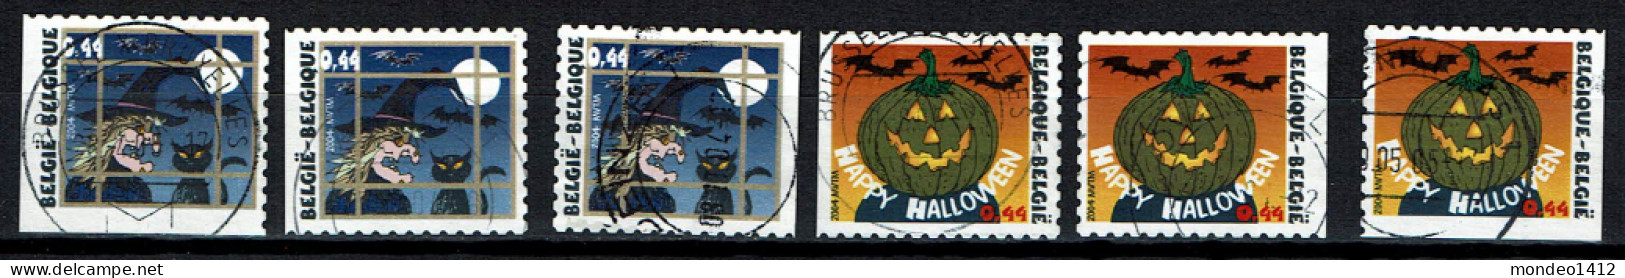 België OBP 3324/3325 - Halloween Pumpkin - Witch - Used Stamps